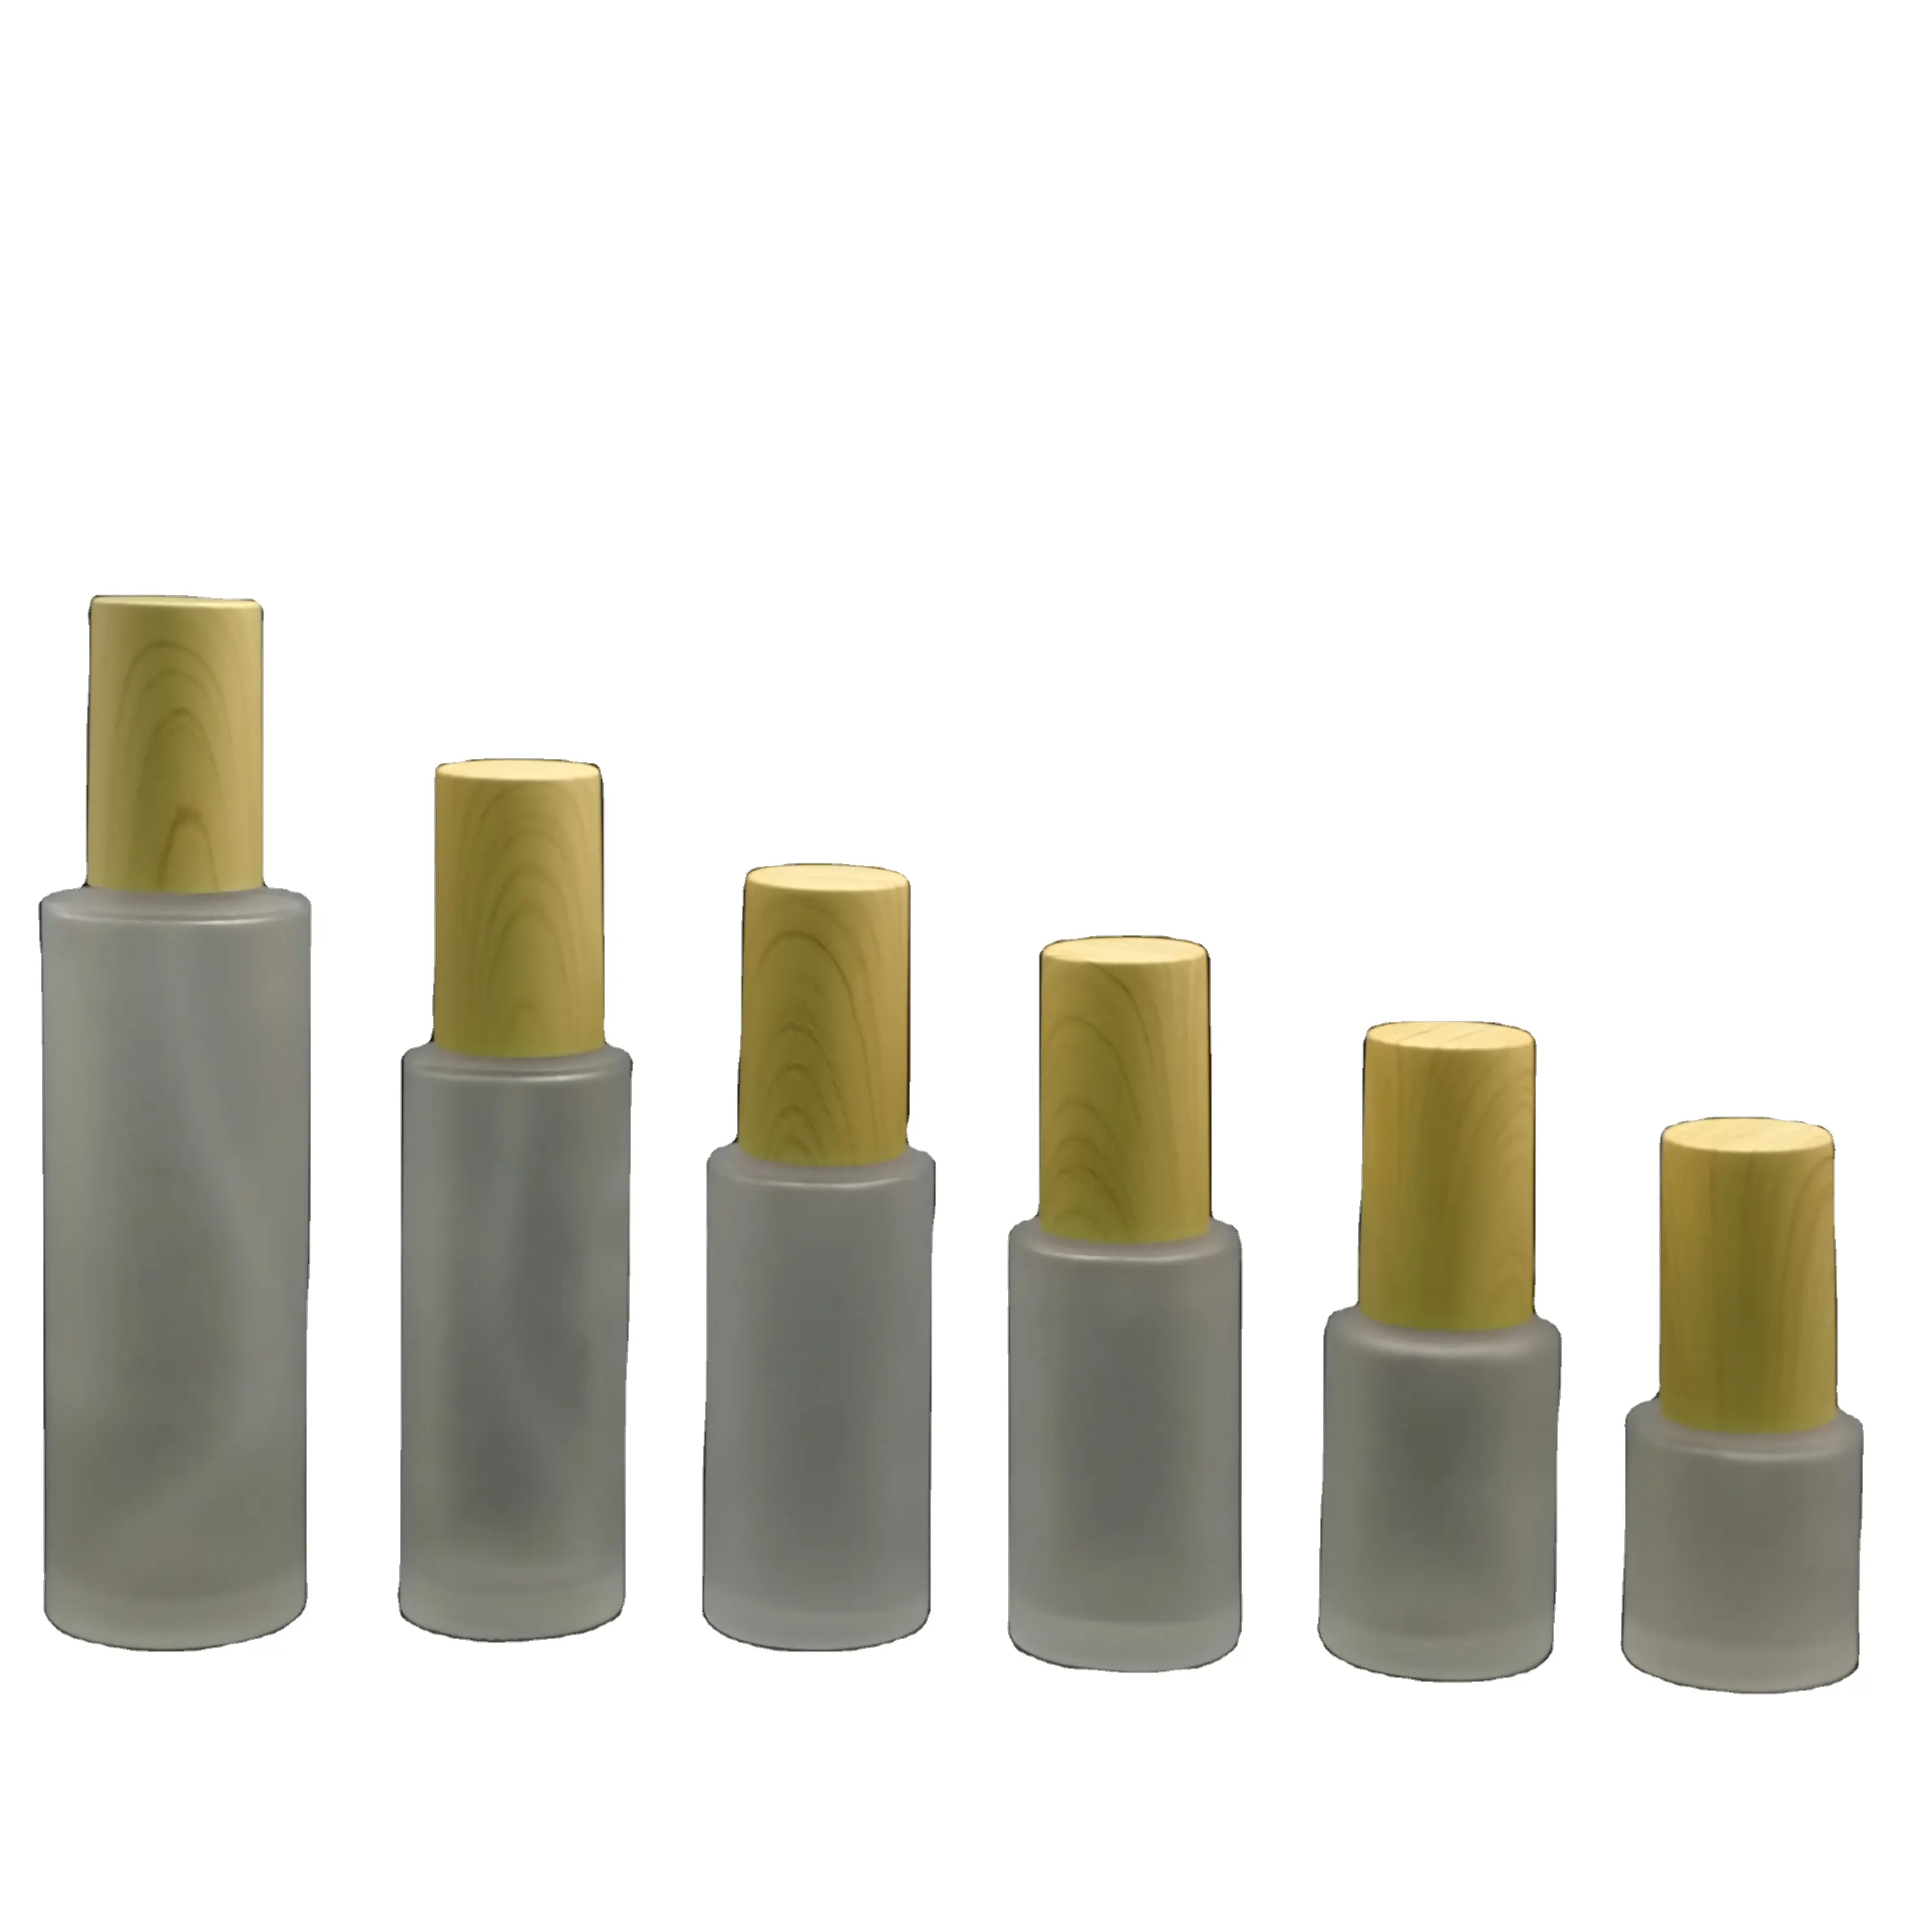 CYLINDER Empty Refillable Frosted Glass Cosmetic Cream Lotion Pump Bottles With Wood Grain Lid For Emulsion Essence Liquid